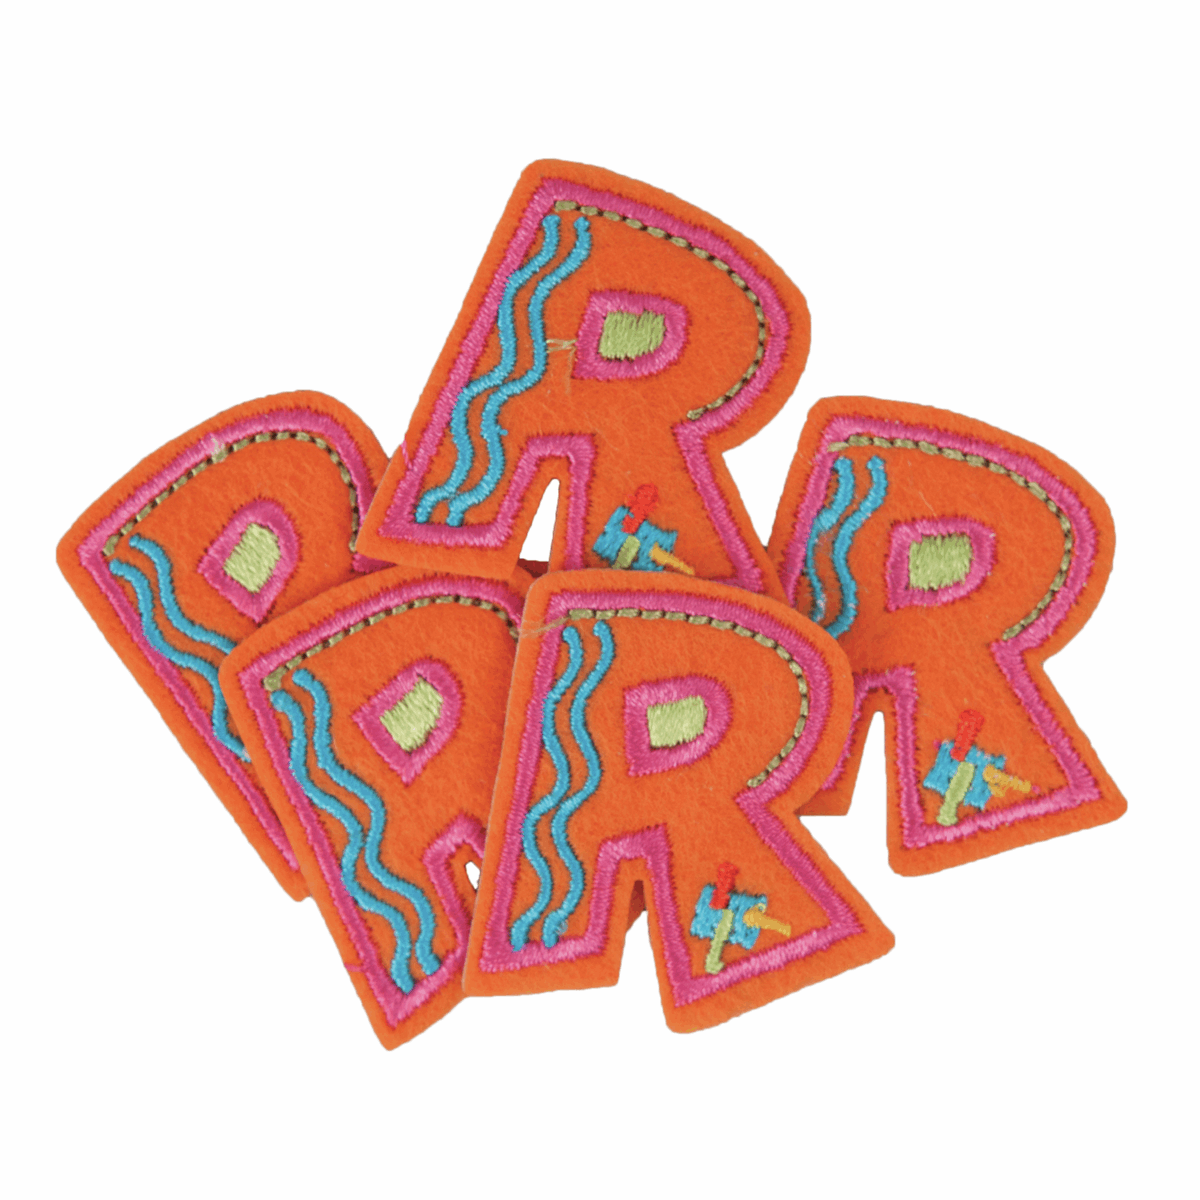 Iron-On/Sew On Alphabet Motif Patch - Letter R